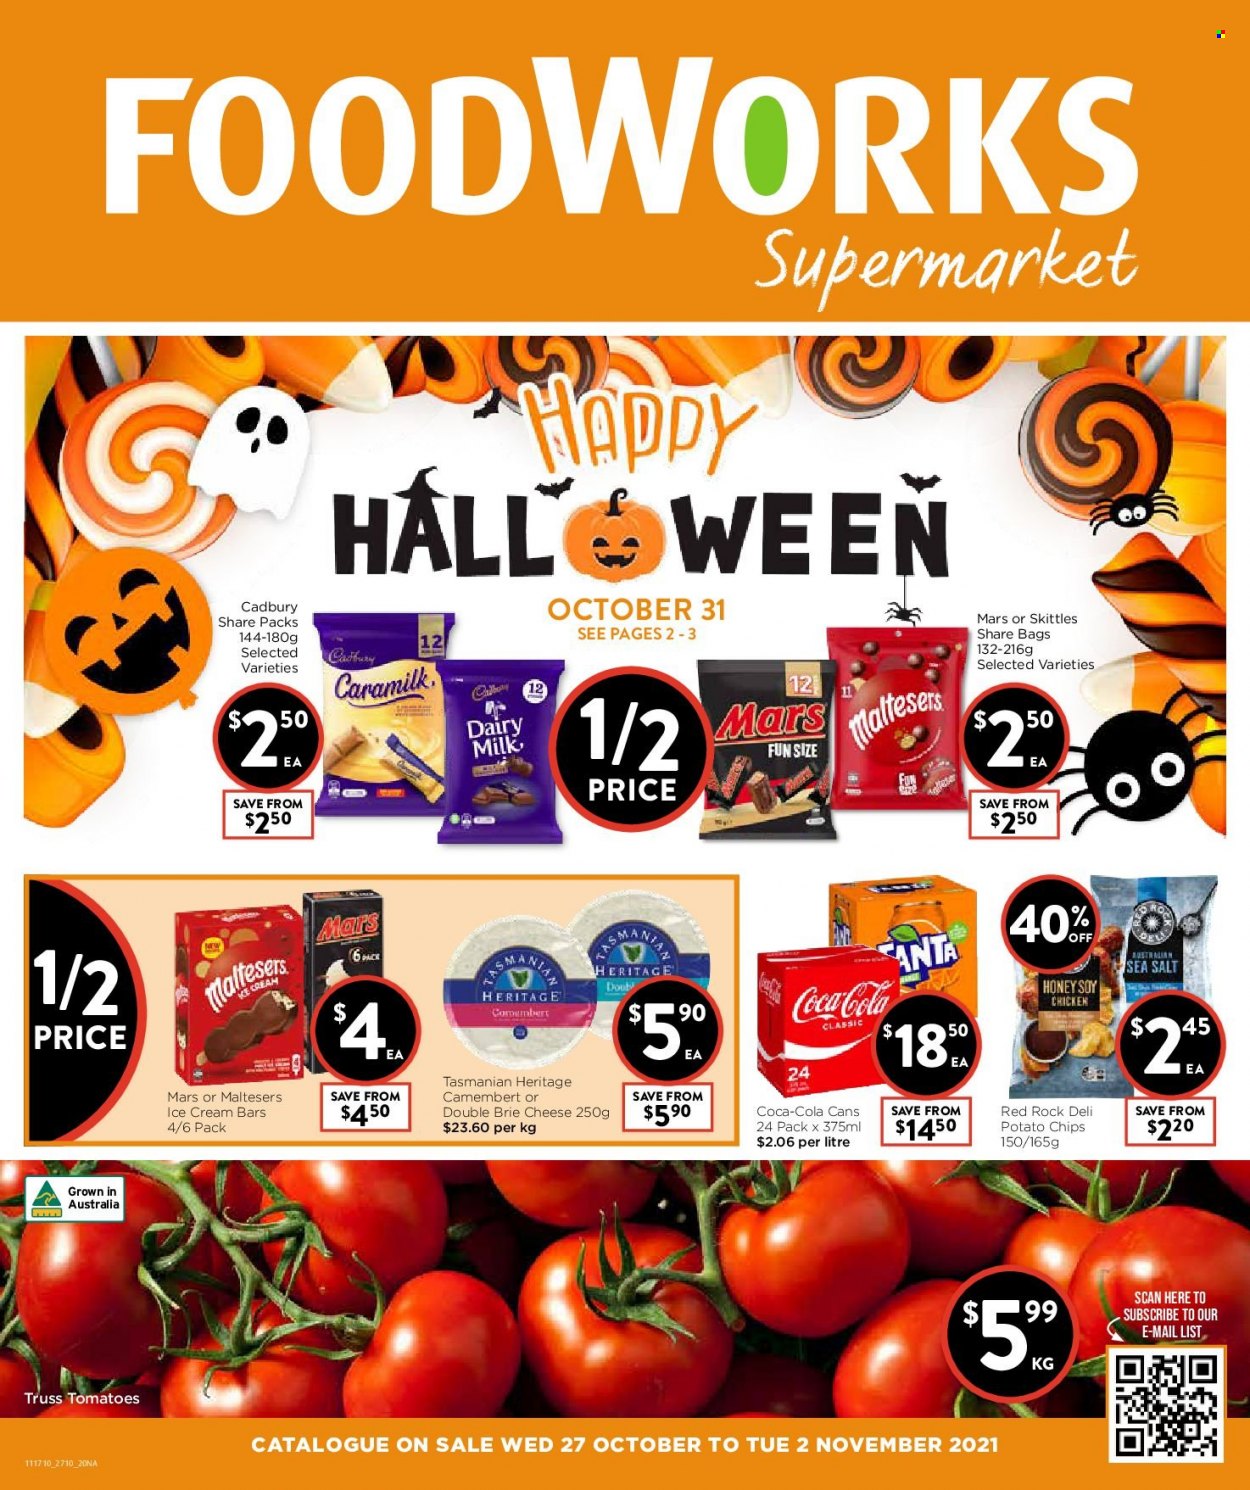 thumbnail - Foodworks Catalogue - 27 Oct 2021 - 2 Nov 2021 - Sales products - tomatoes, camembert, cheese, brie, Tasmanian Heritage, ice cream, ice cream bars, Mars, Maltesers, Cadbury, Dairy Milk, Skittles, potato chips, chips, honey, Coca-Cola. Page 1.